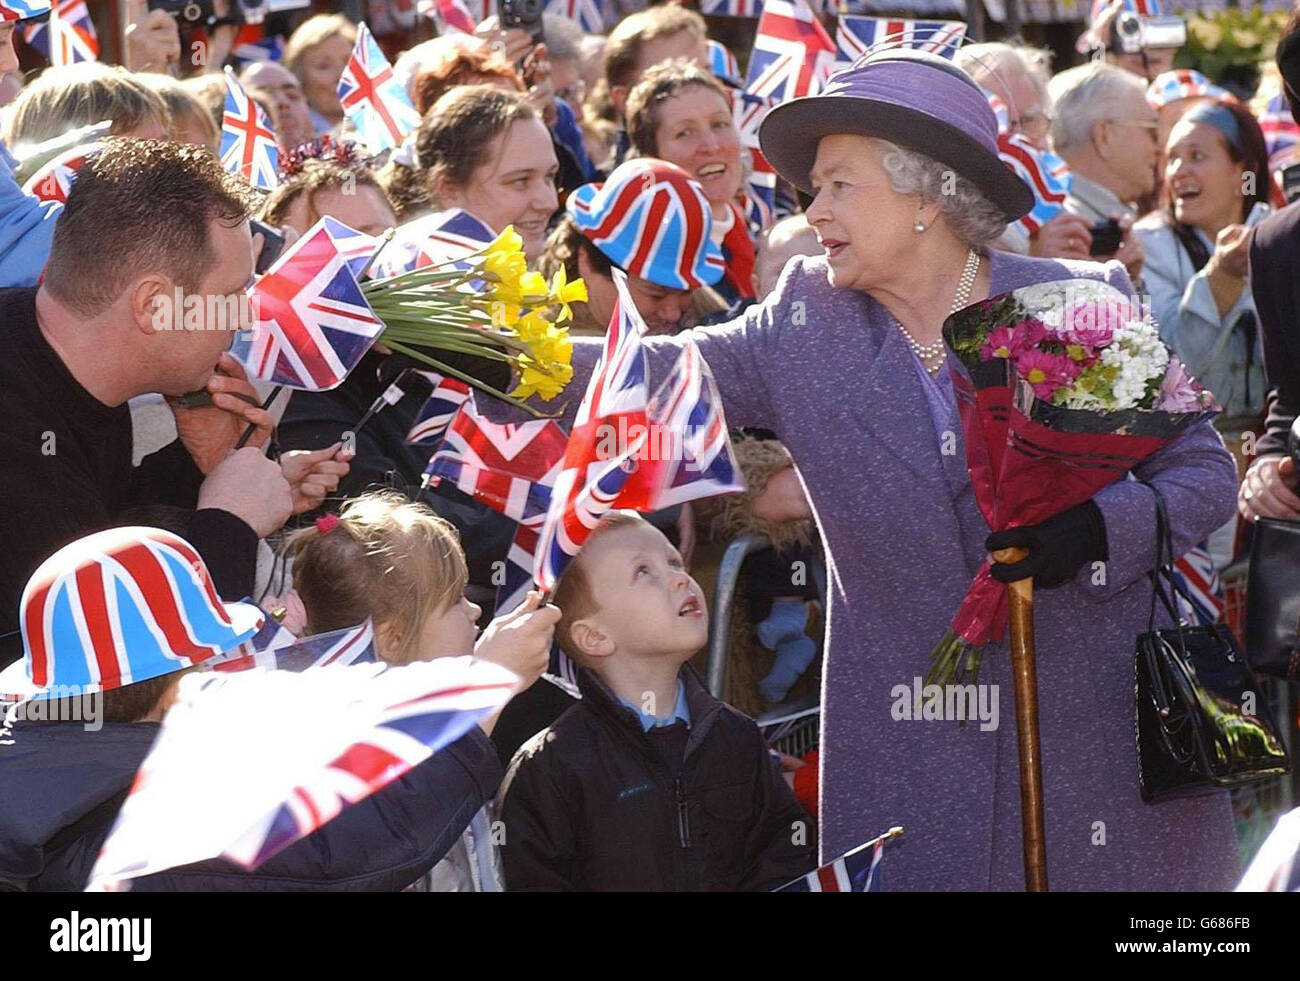 Britain's Queen Elizabeth II meets well wishers and stall holders during a visit to the market square of Romford. A previous Labour administration had famously refused to fly the Union flag above the Town Hall for fear of offending racial minorities. * ... who associated it with extreme right-wing groups, leading to an objection by stallholders, who defeated Havering Council. Stock Photo